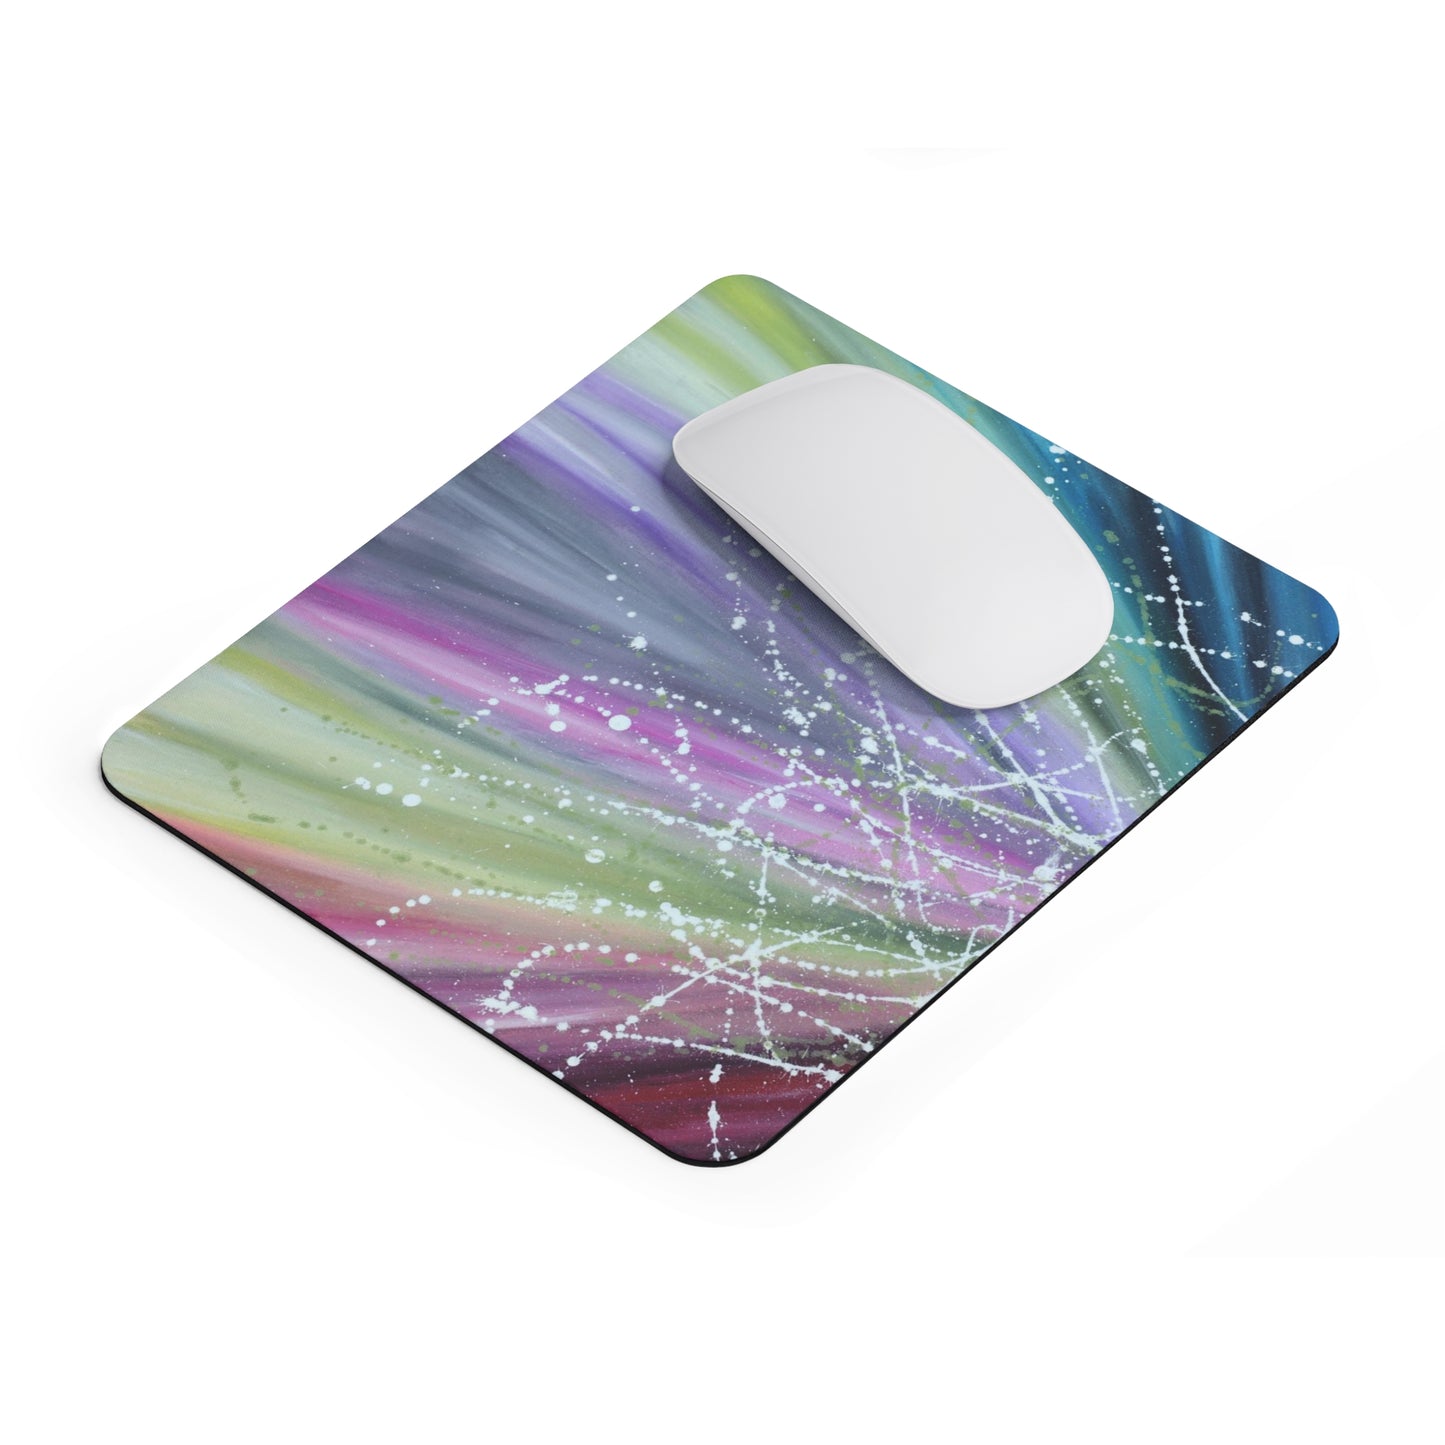 MOUSE PAD - COLORFUL LOTUS